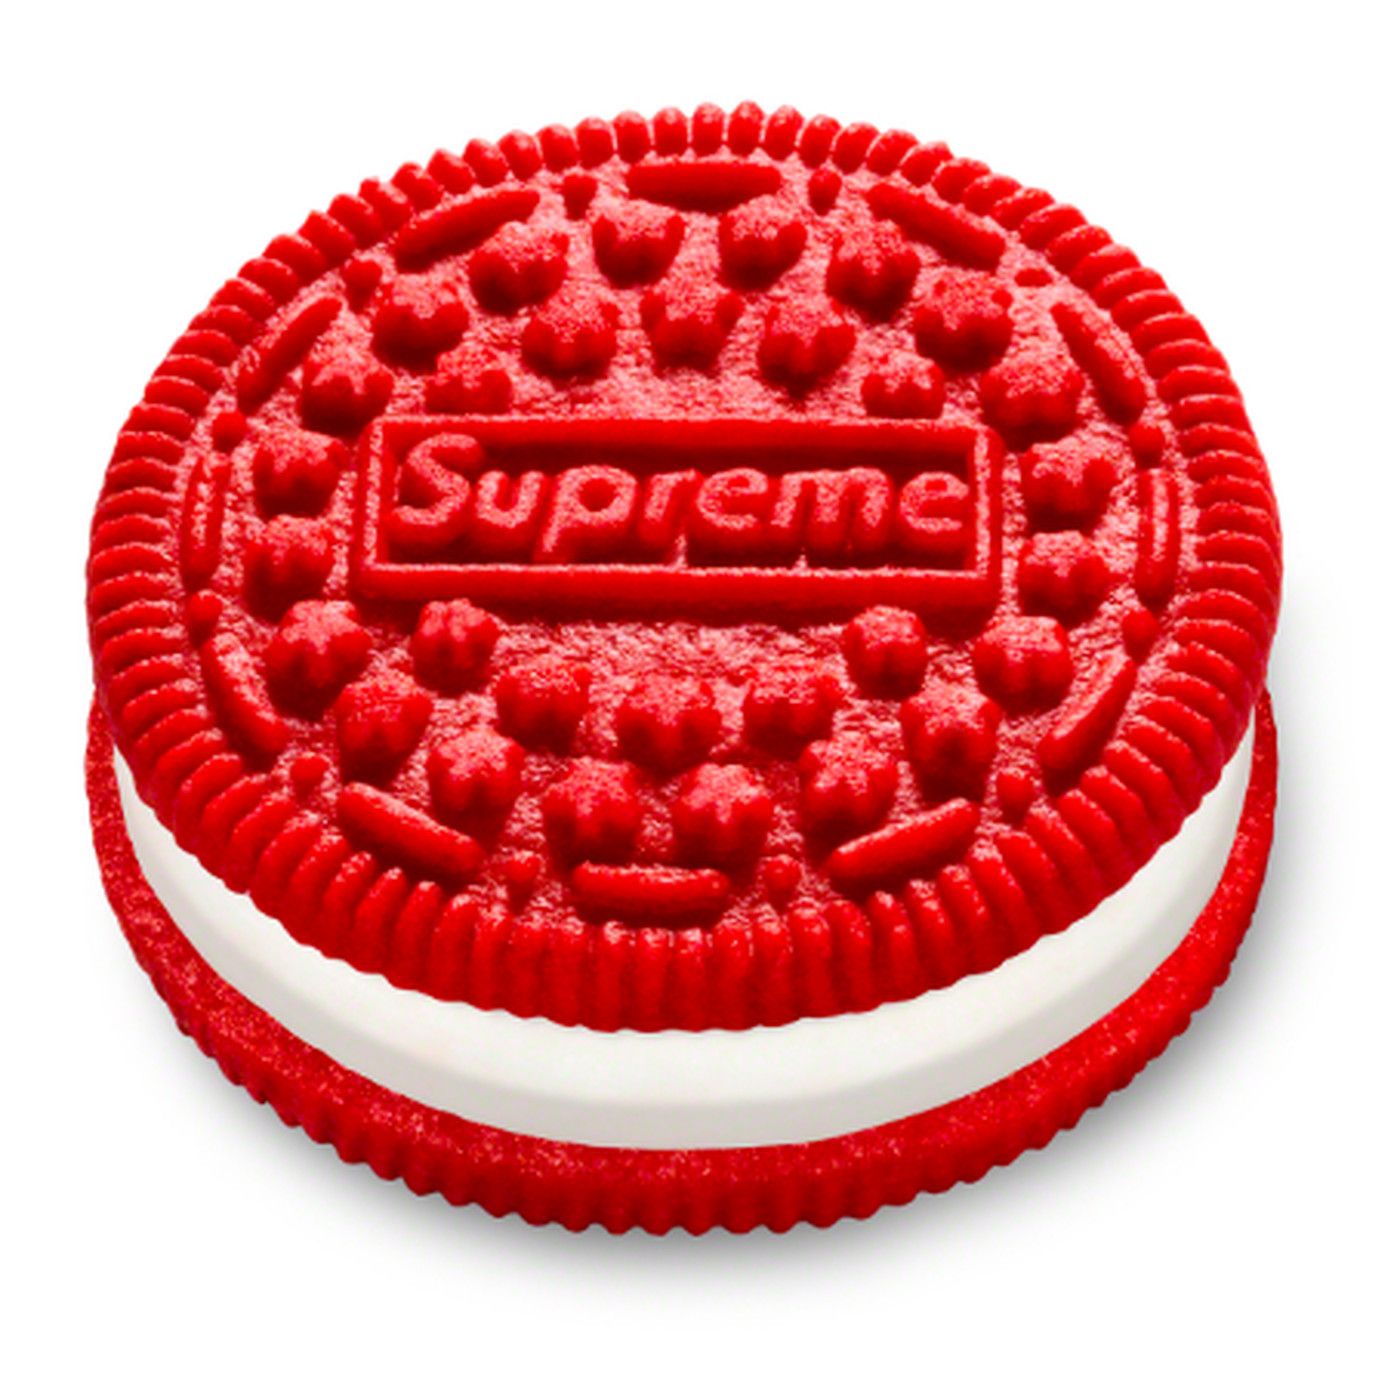 Supreme Branded Oreos Are Already Listed For $500 Resale On EBay